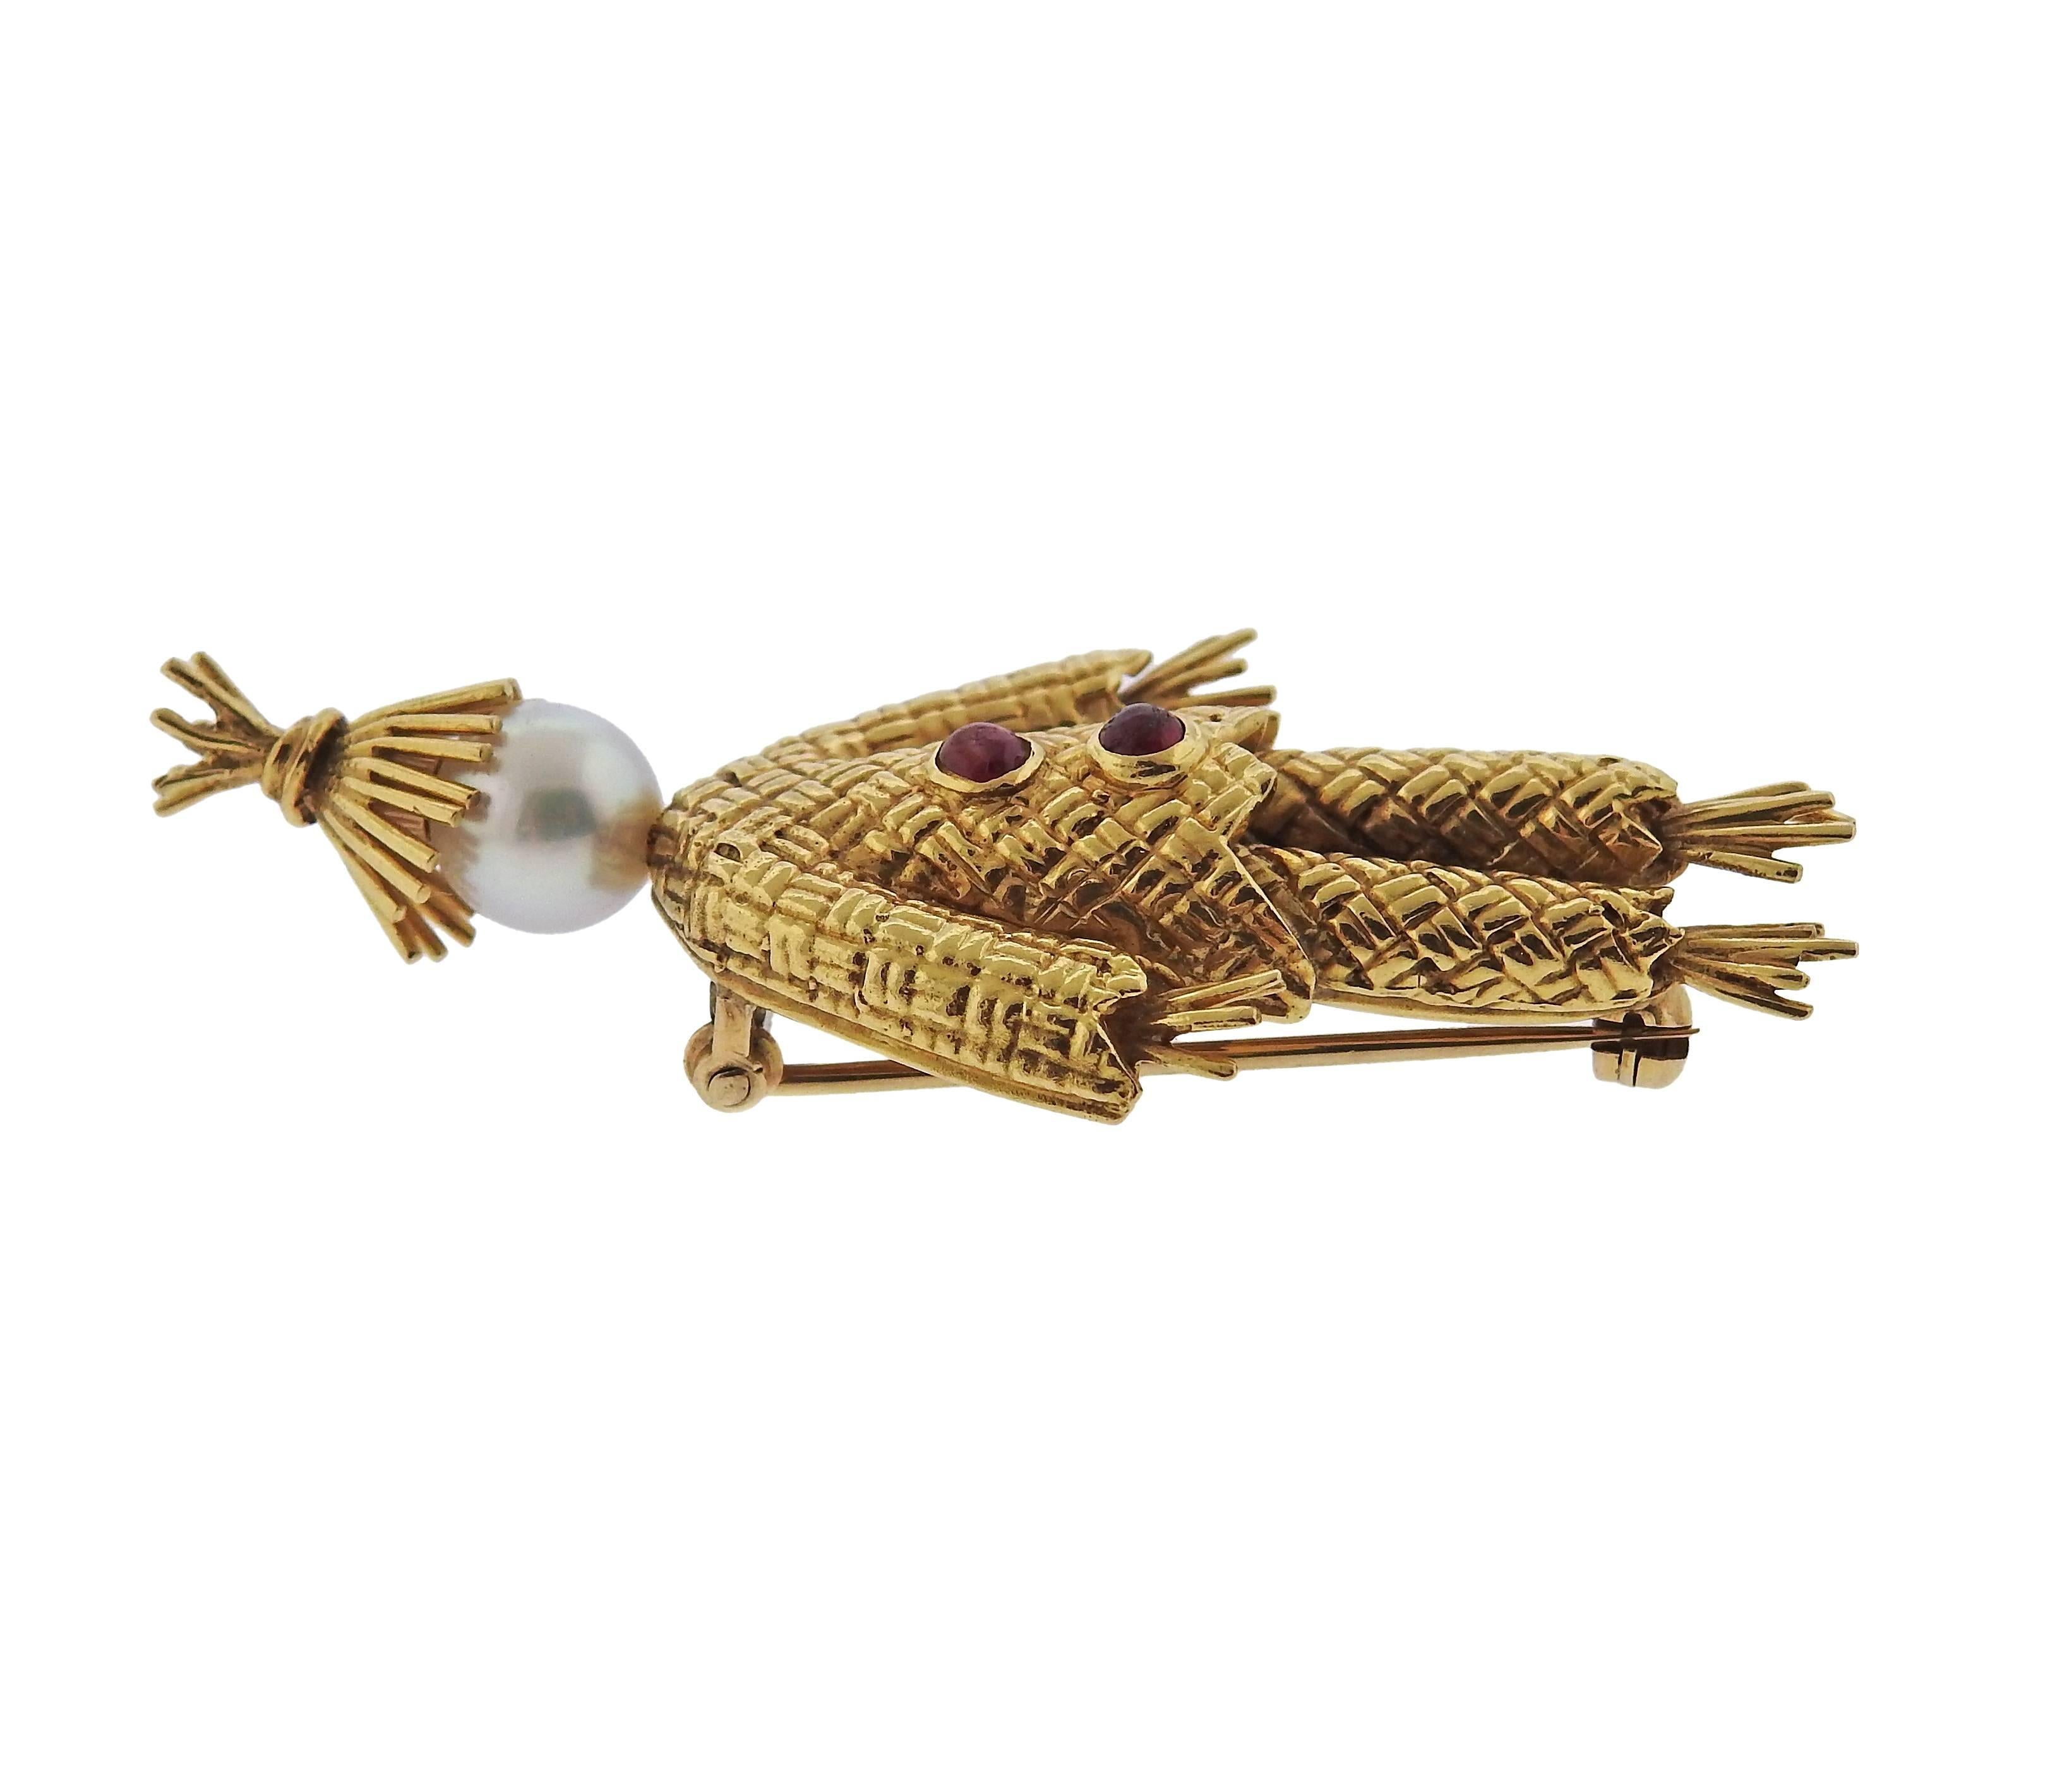 An 18k gold pearl ruby scarecrow brooch pin crafted by Van Cleef & Arpels. Brooch measures 53mm X 24mm. Marked VCA NY 18k. Weight is 10.8 grams. 